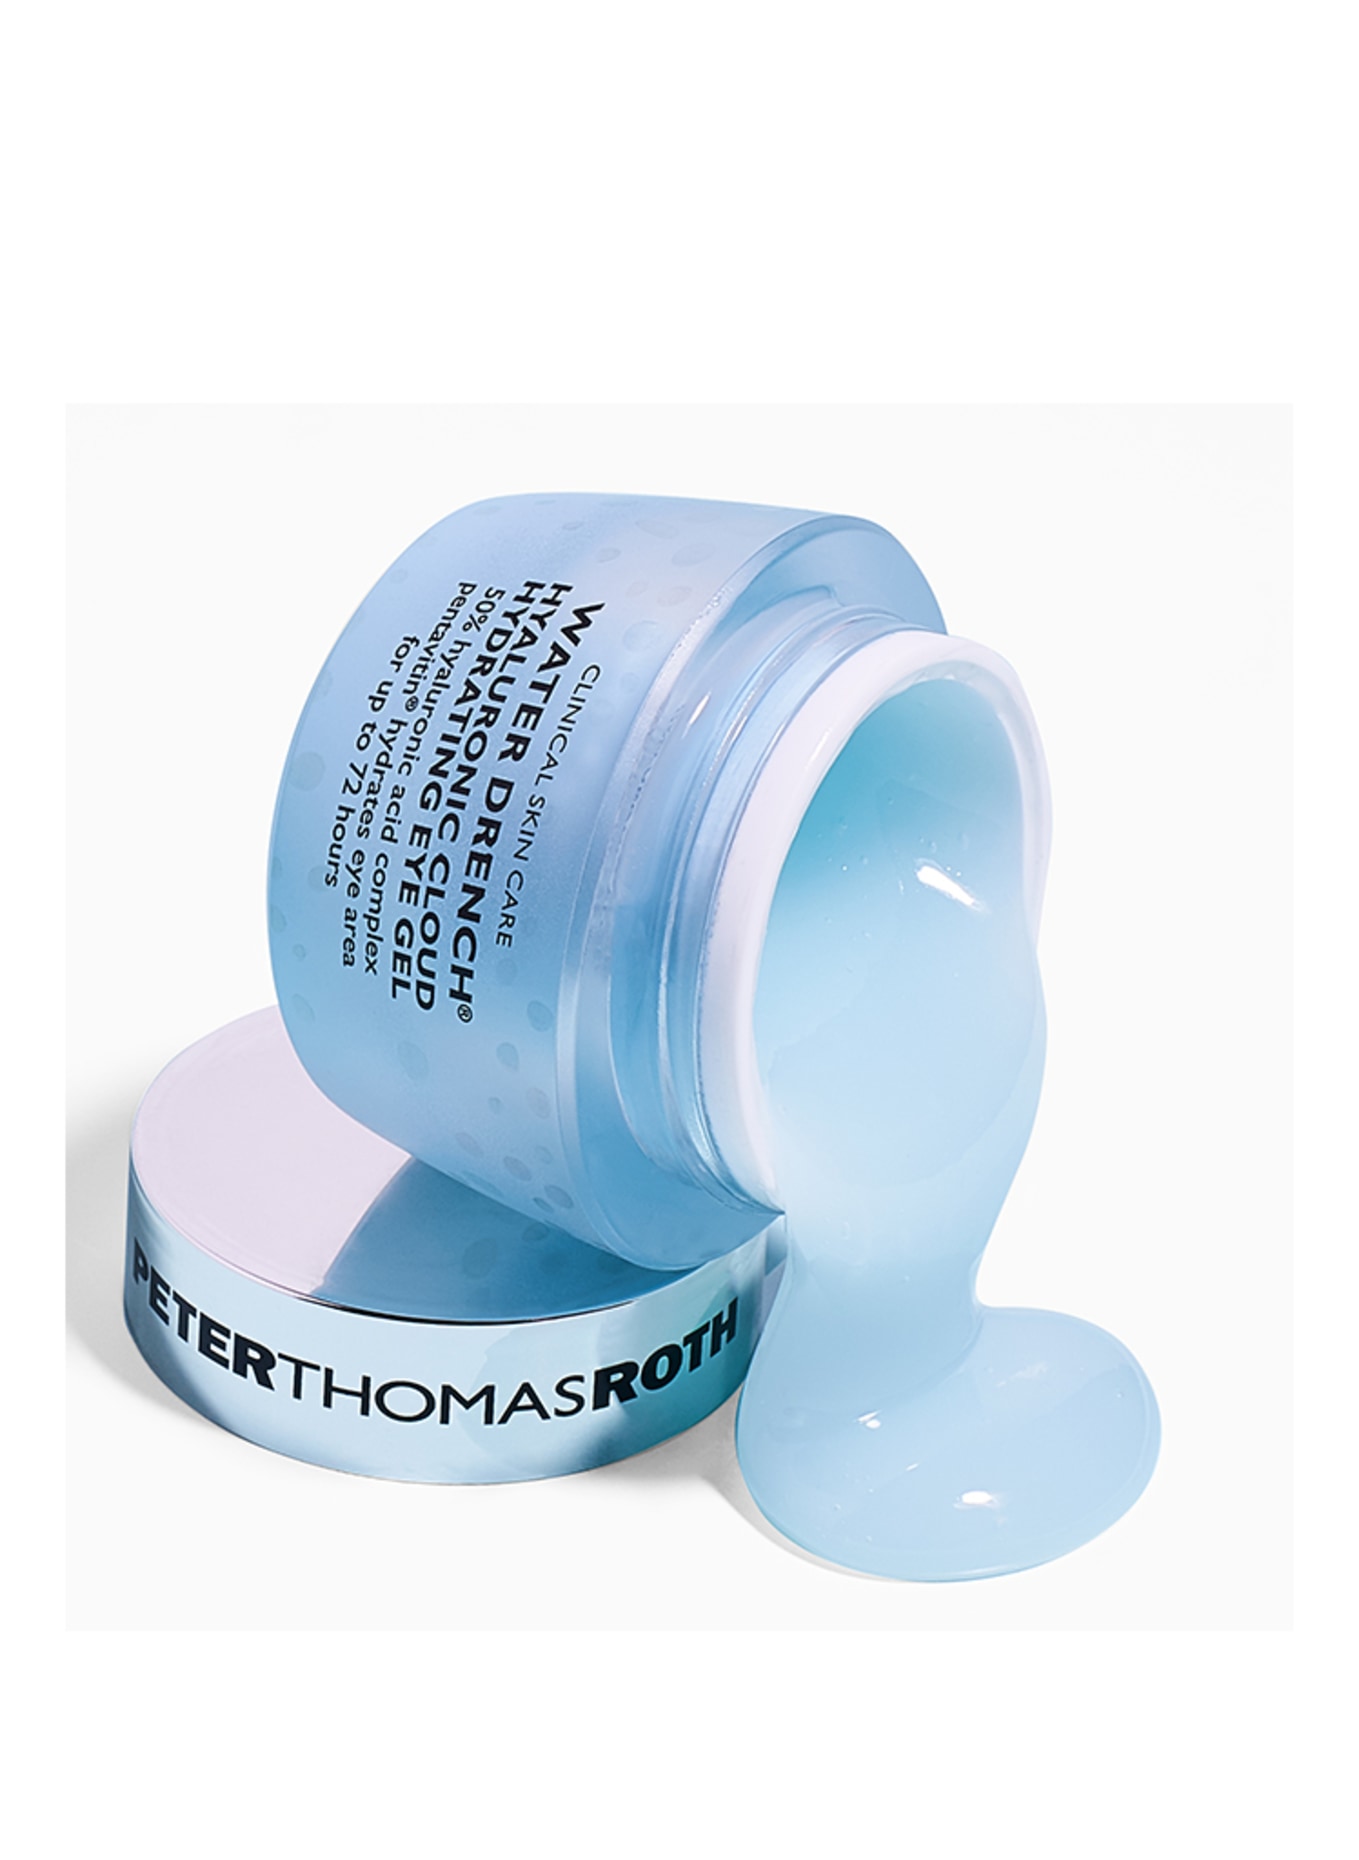 PETER THOMAS ROTH WATER DRENCH (Obrázek 5)